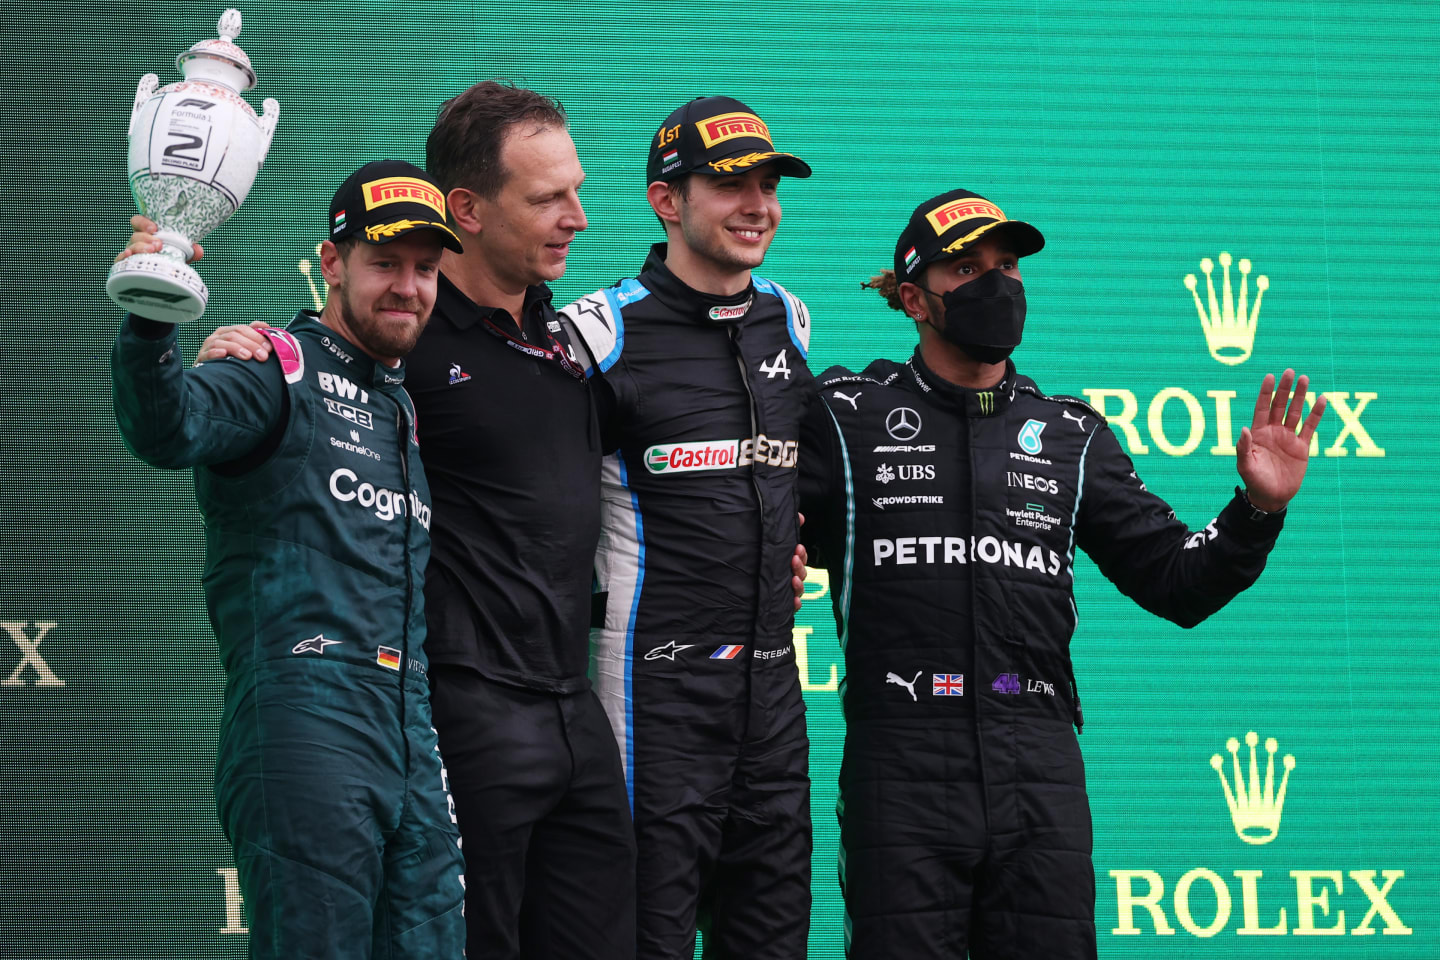 BUDAPEST, HUNGARY - AUGUST 01: Race winner Esteban Ocon of France and Alpine F1 Team, second placed Sebastian Vettel of Germany and Aston Martin F1 Team and third placed Lewis Hamilton of Great Britain and Mercedes GP celebrate on the podium during the F1 Grand Prix of Hungary at Hungaroring on August 01, 2021 in Budapest, Hungary. (Photo by Lars Baron/Getty Images)